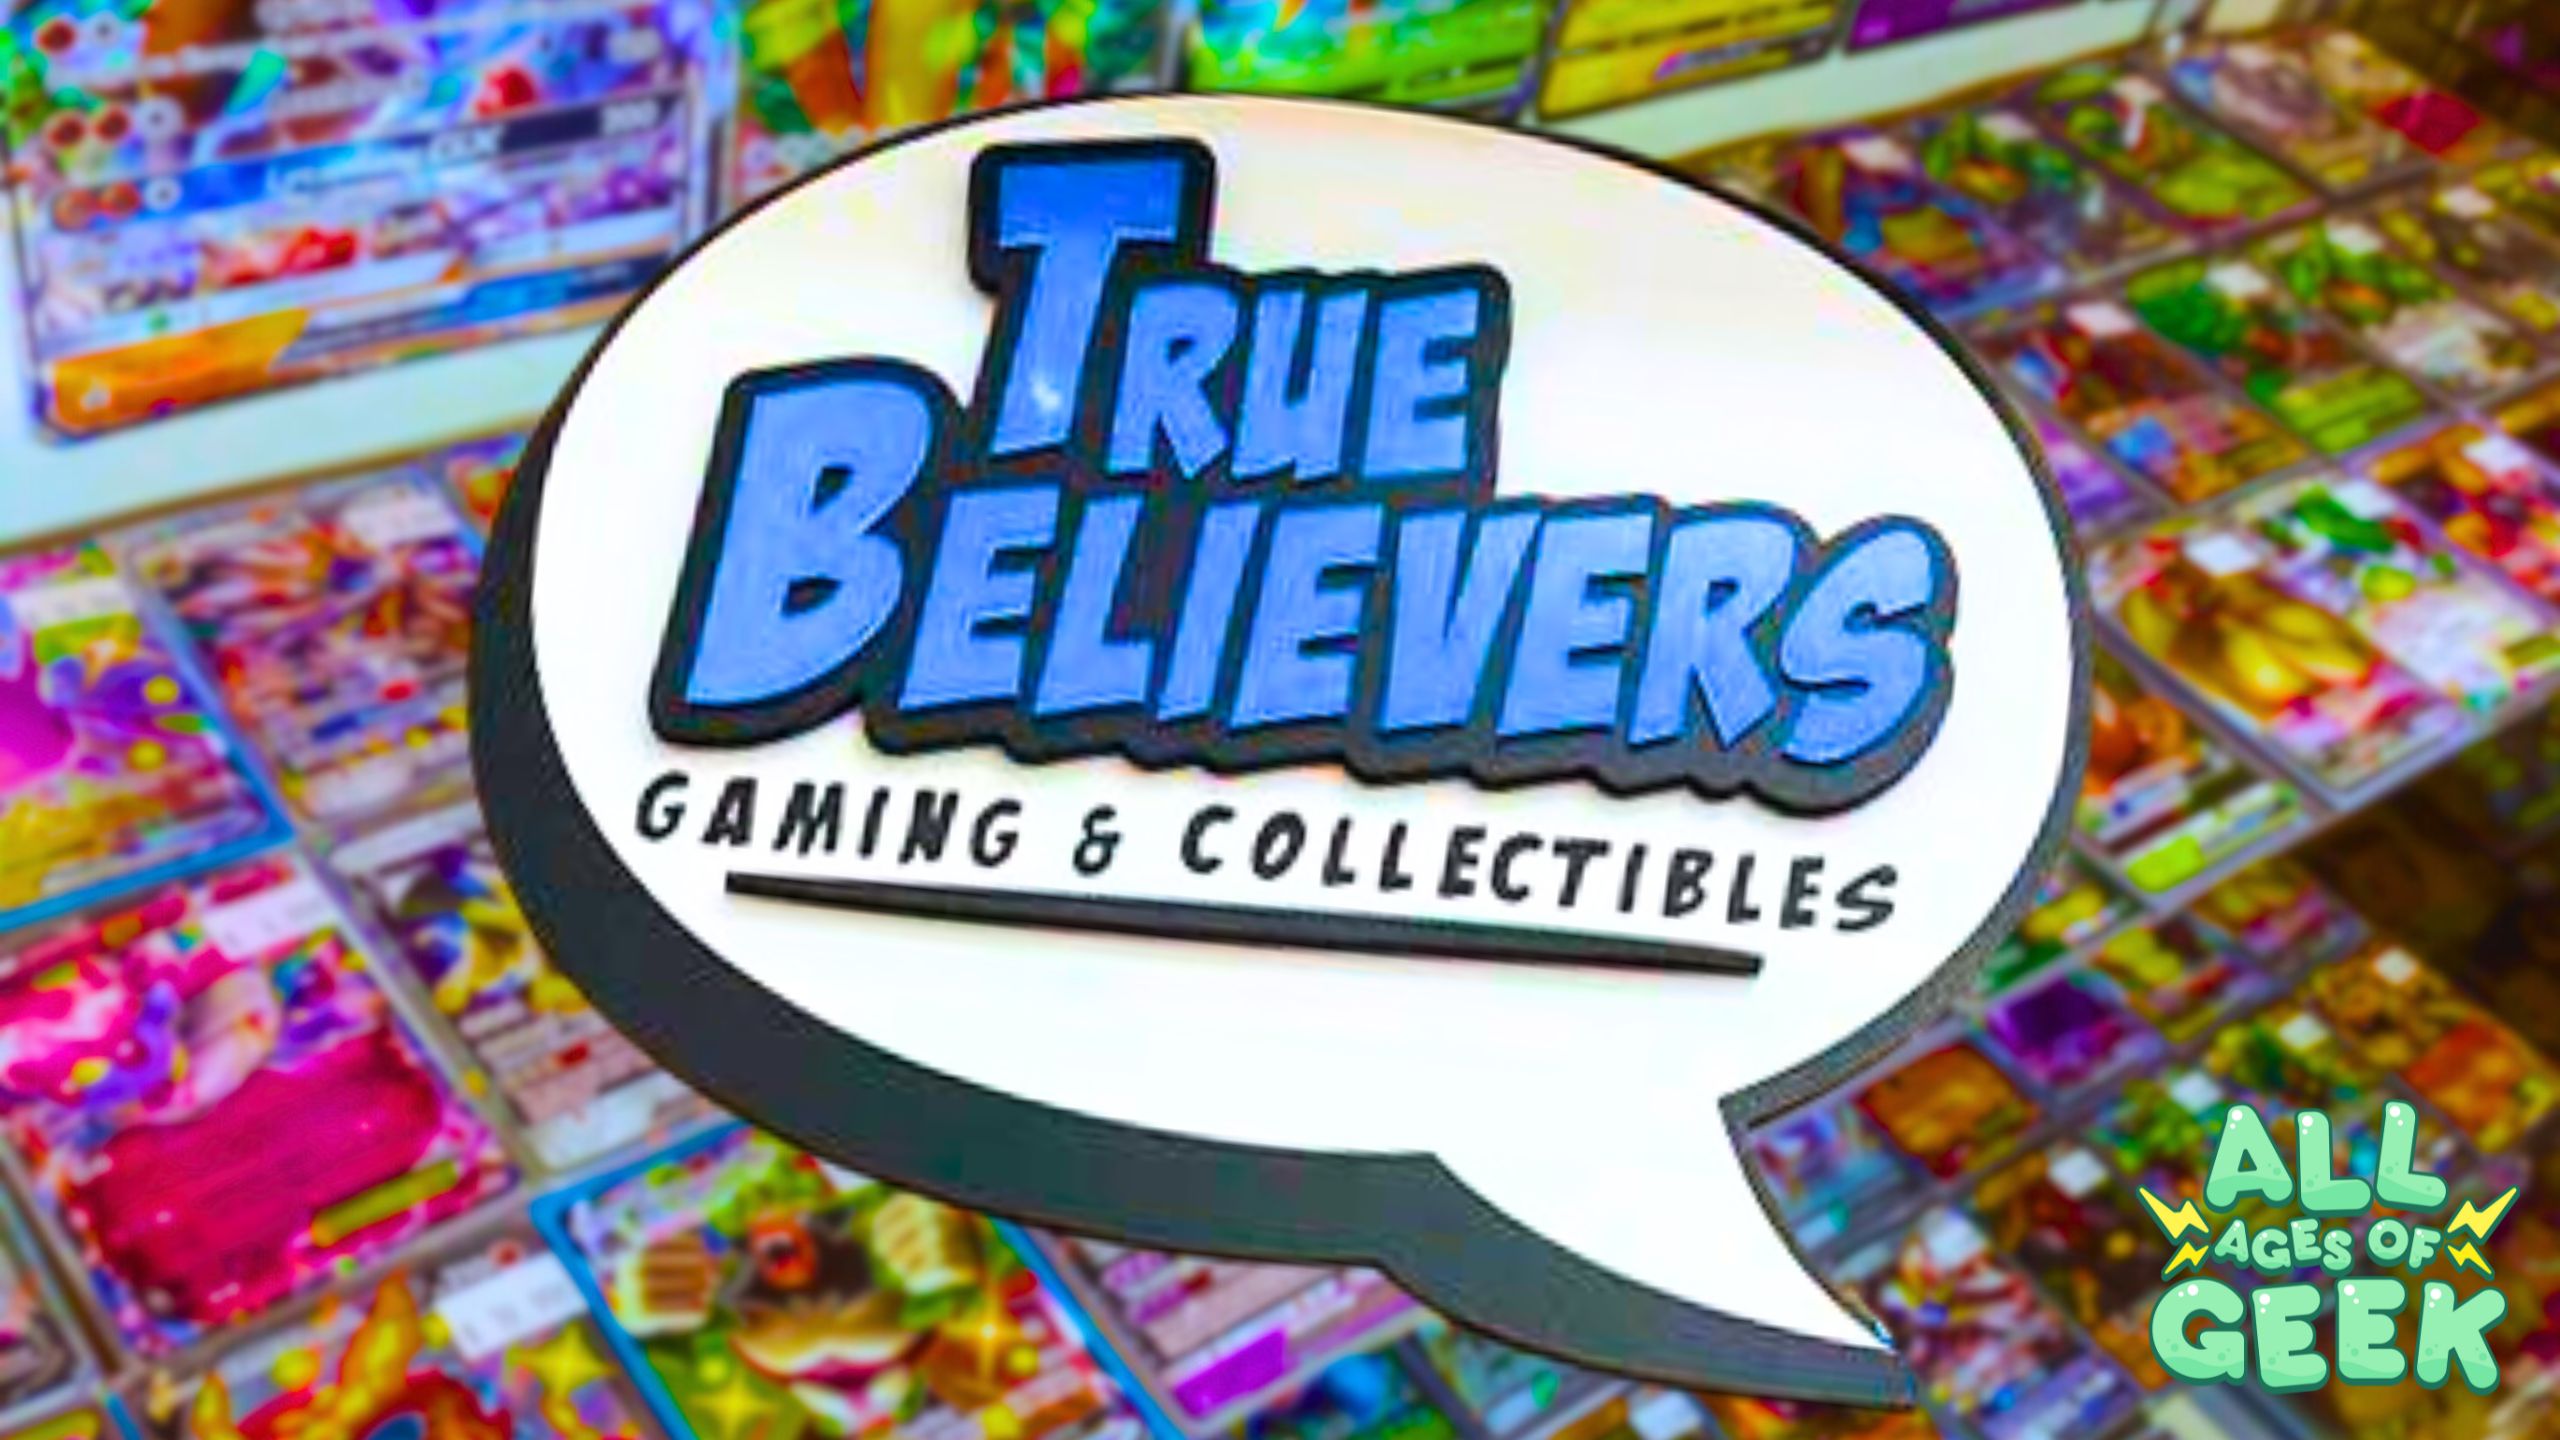 True Believers Gaming and Collectibles: A Must-Visit Spot for Geeks in Edison, NJ